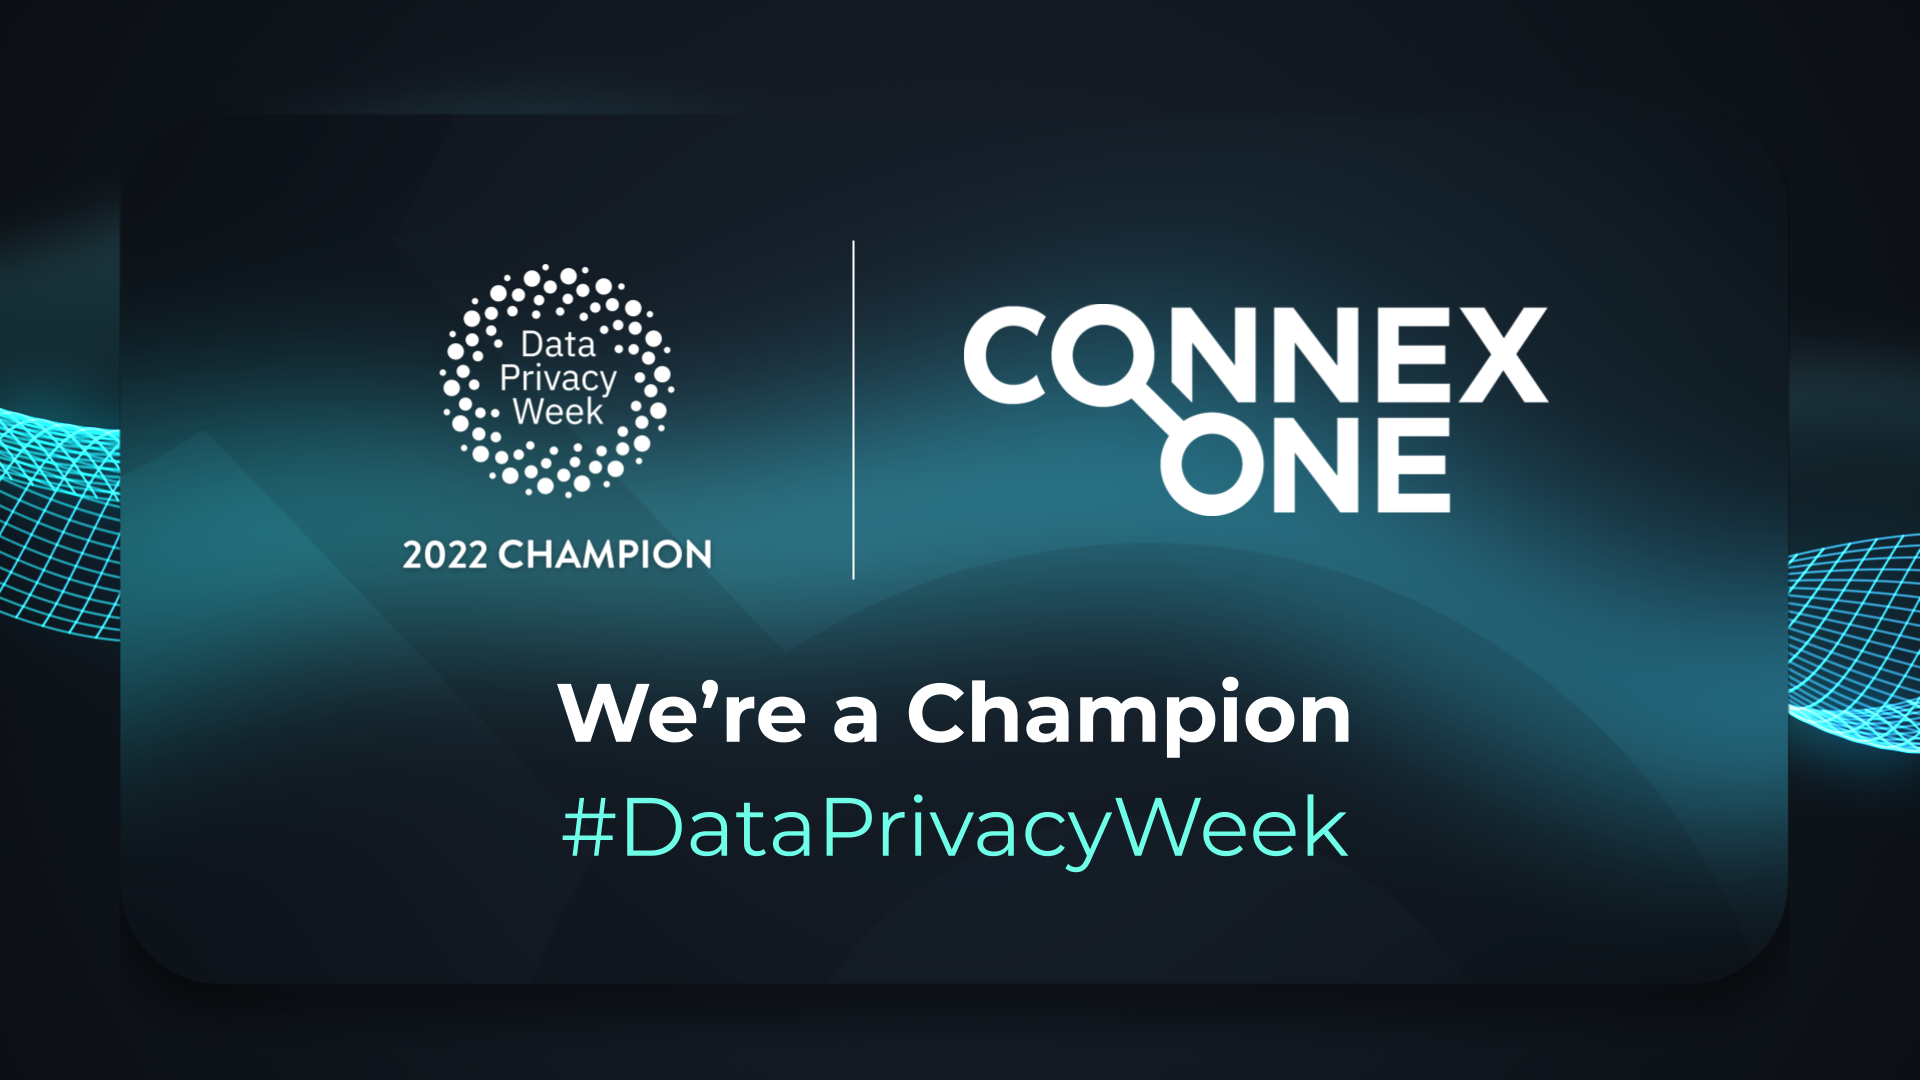 Connex One announced as a Champion for Data Privacy Week.